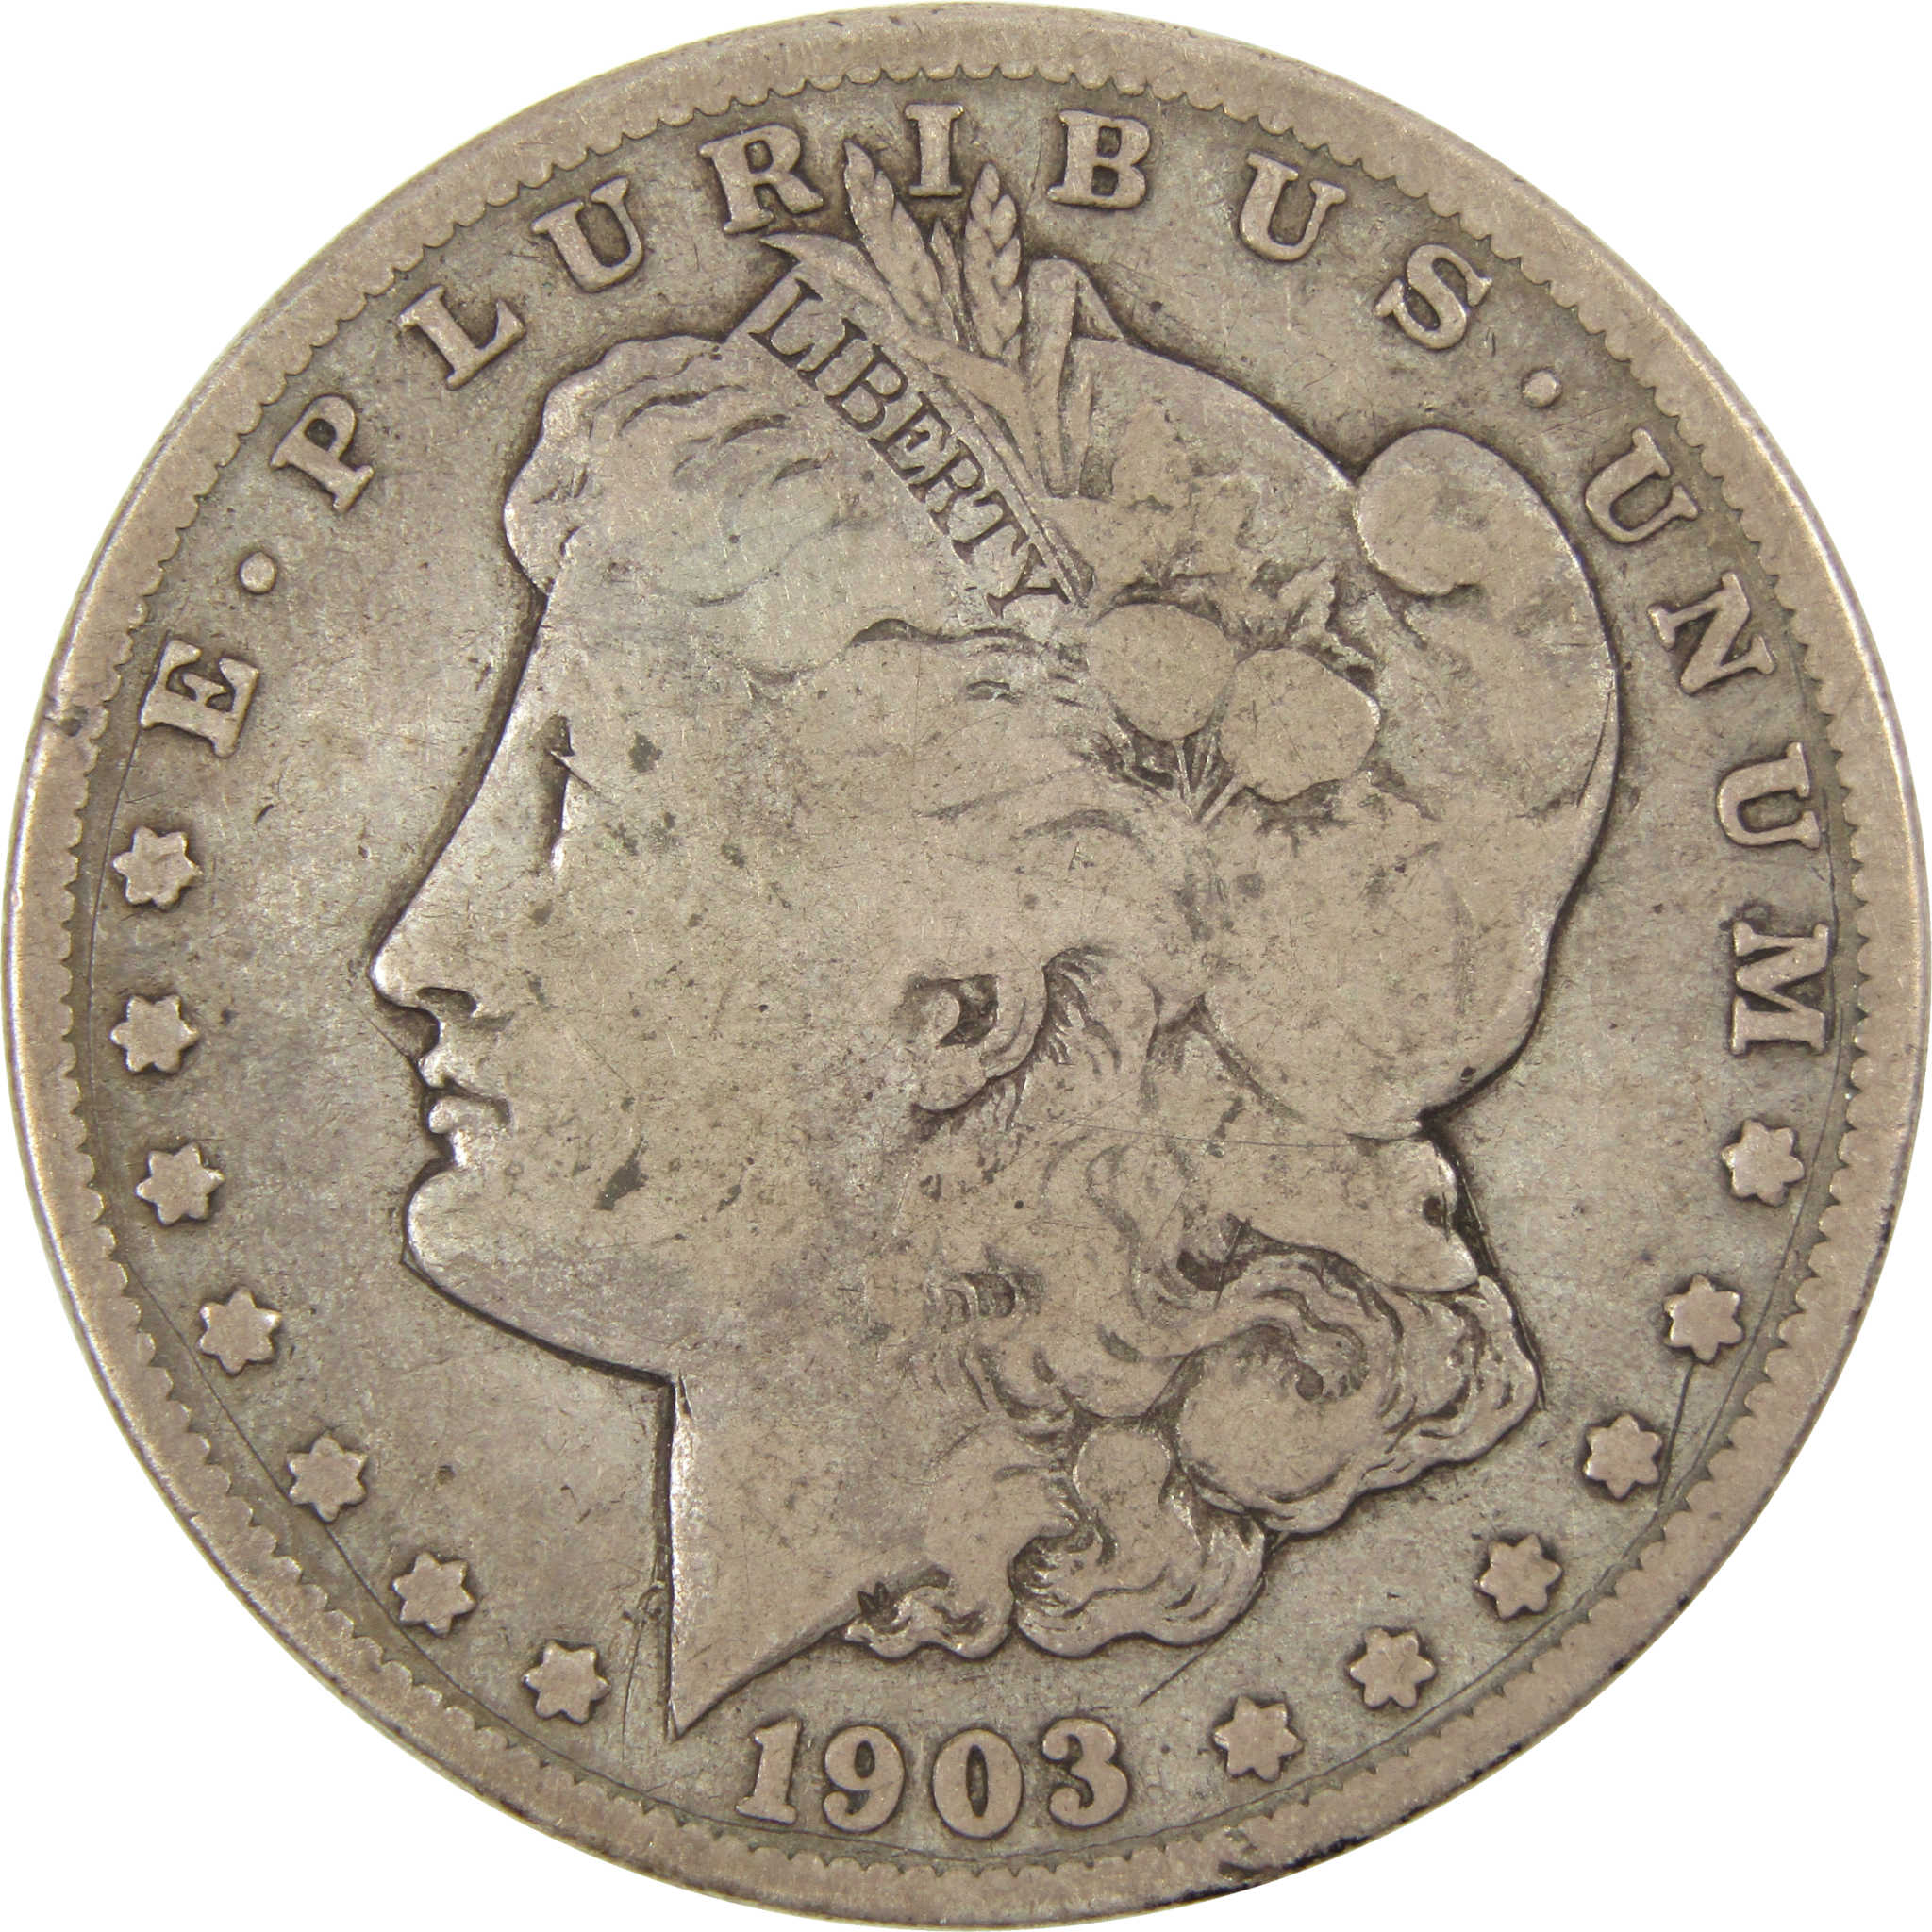 1903 S Morgan Dollar VG Very Good Details 90% Silver $1 Coin SKU:I8347 - Morgan coin - Morgan silver dollar - Morgan silver dollar for sale - Profile Coins &amp; Collectibles